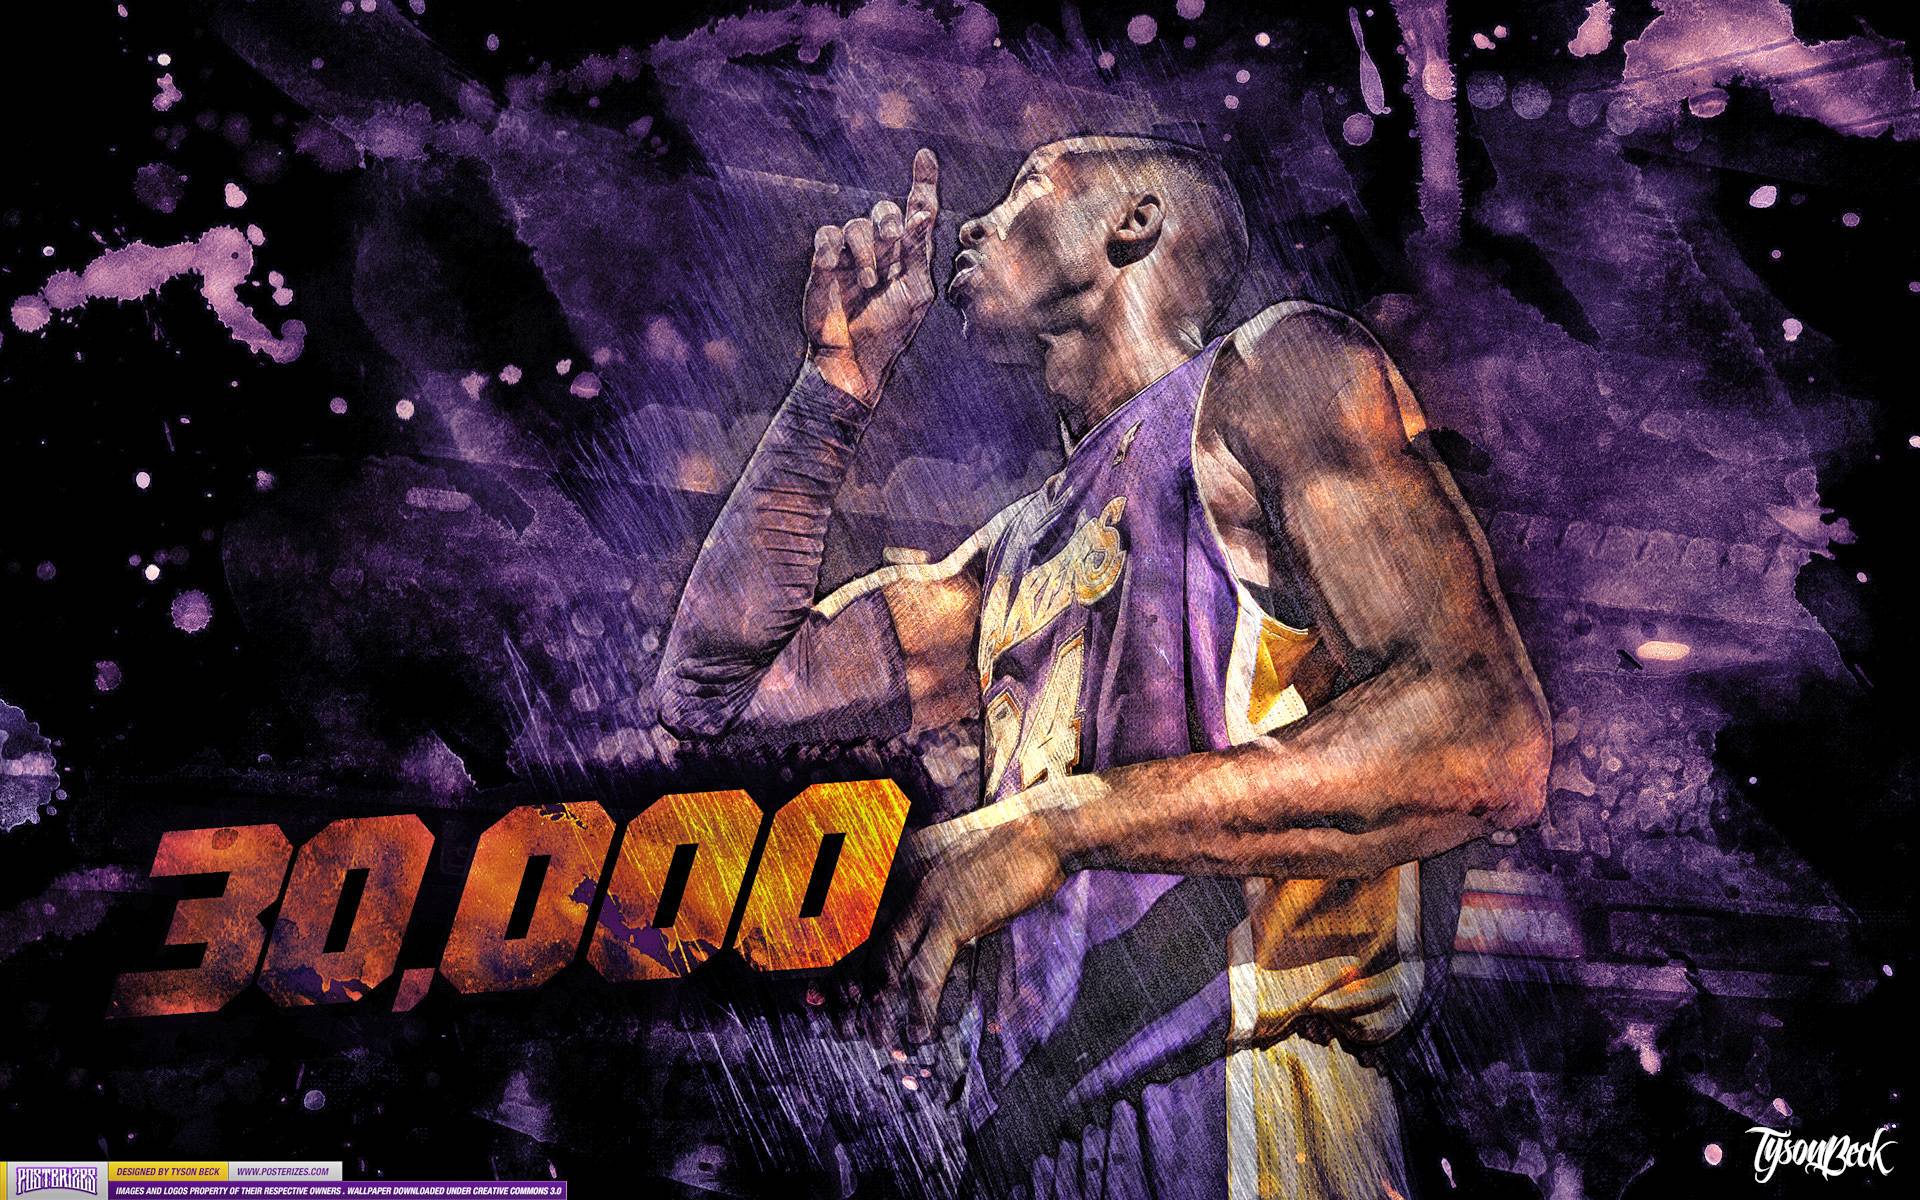 HoopsWallpaperscom  Get the latest HD and mobile NBA wallpapers today   Blog Archive Mamba  Mambacita Forever wallpaper  HoopsWallpaperscom   Get the latest HD and mobile NBA wallpapers today